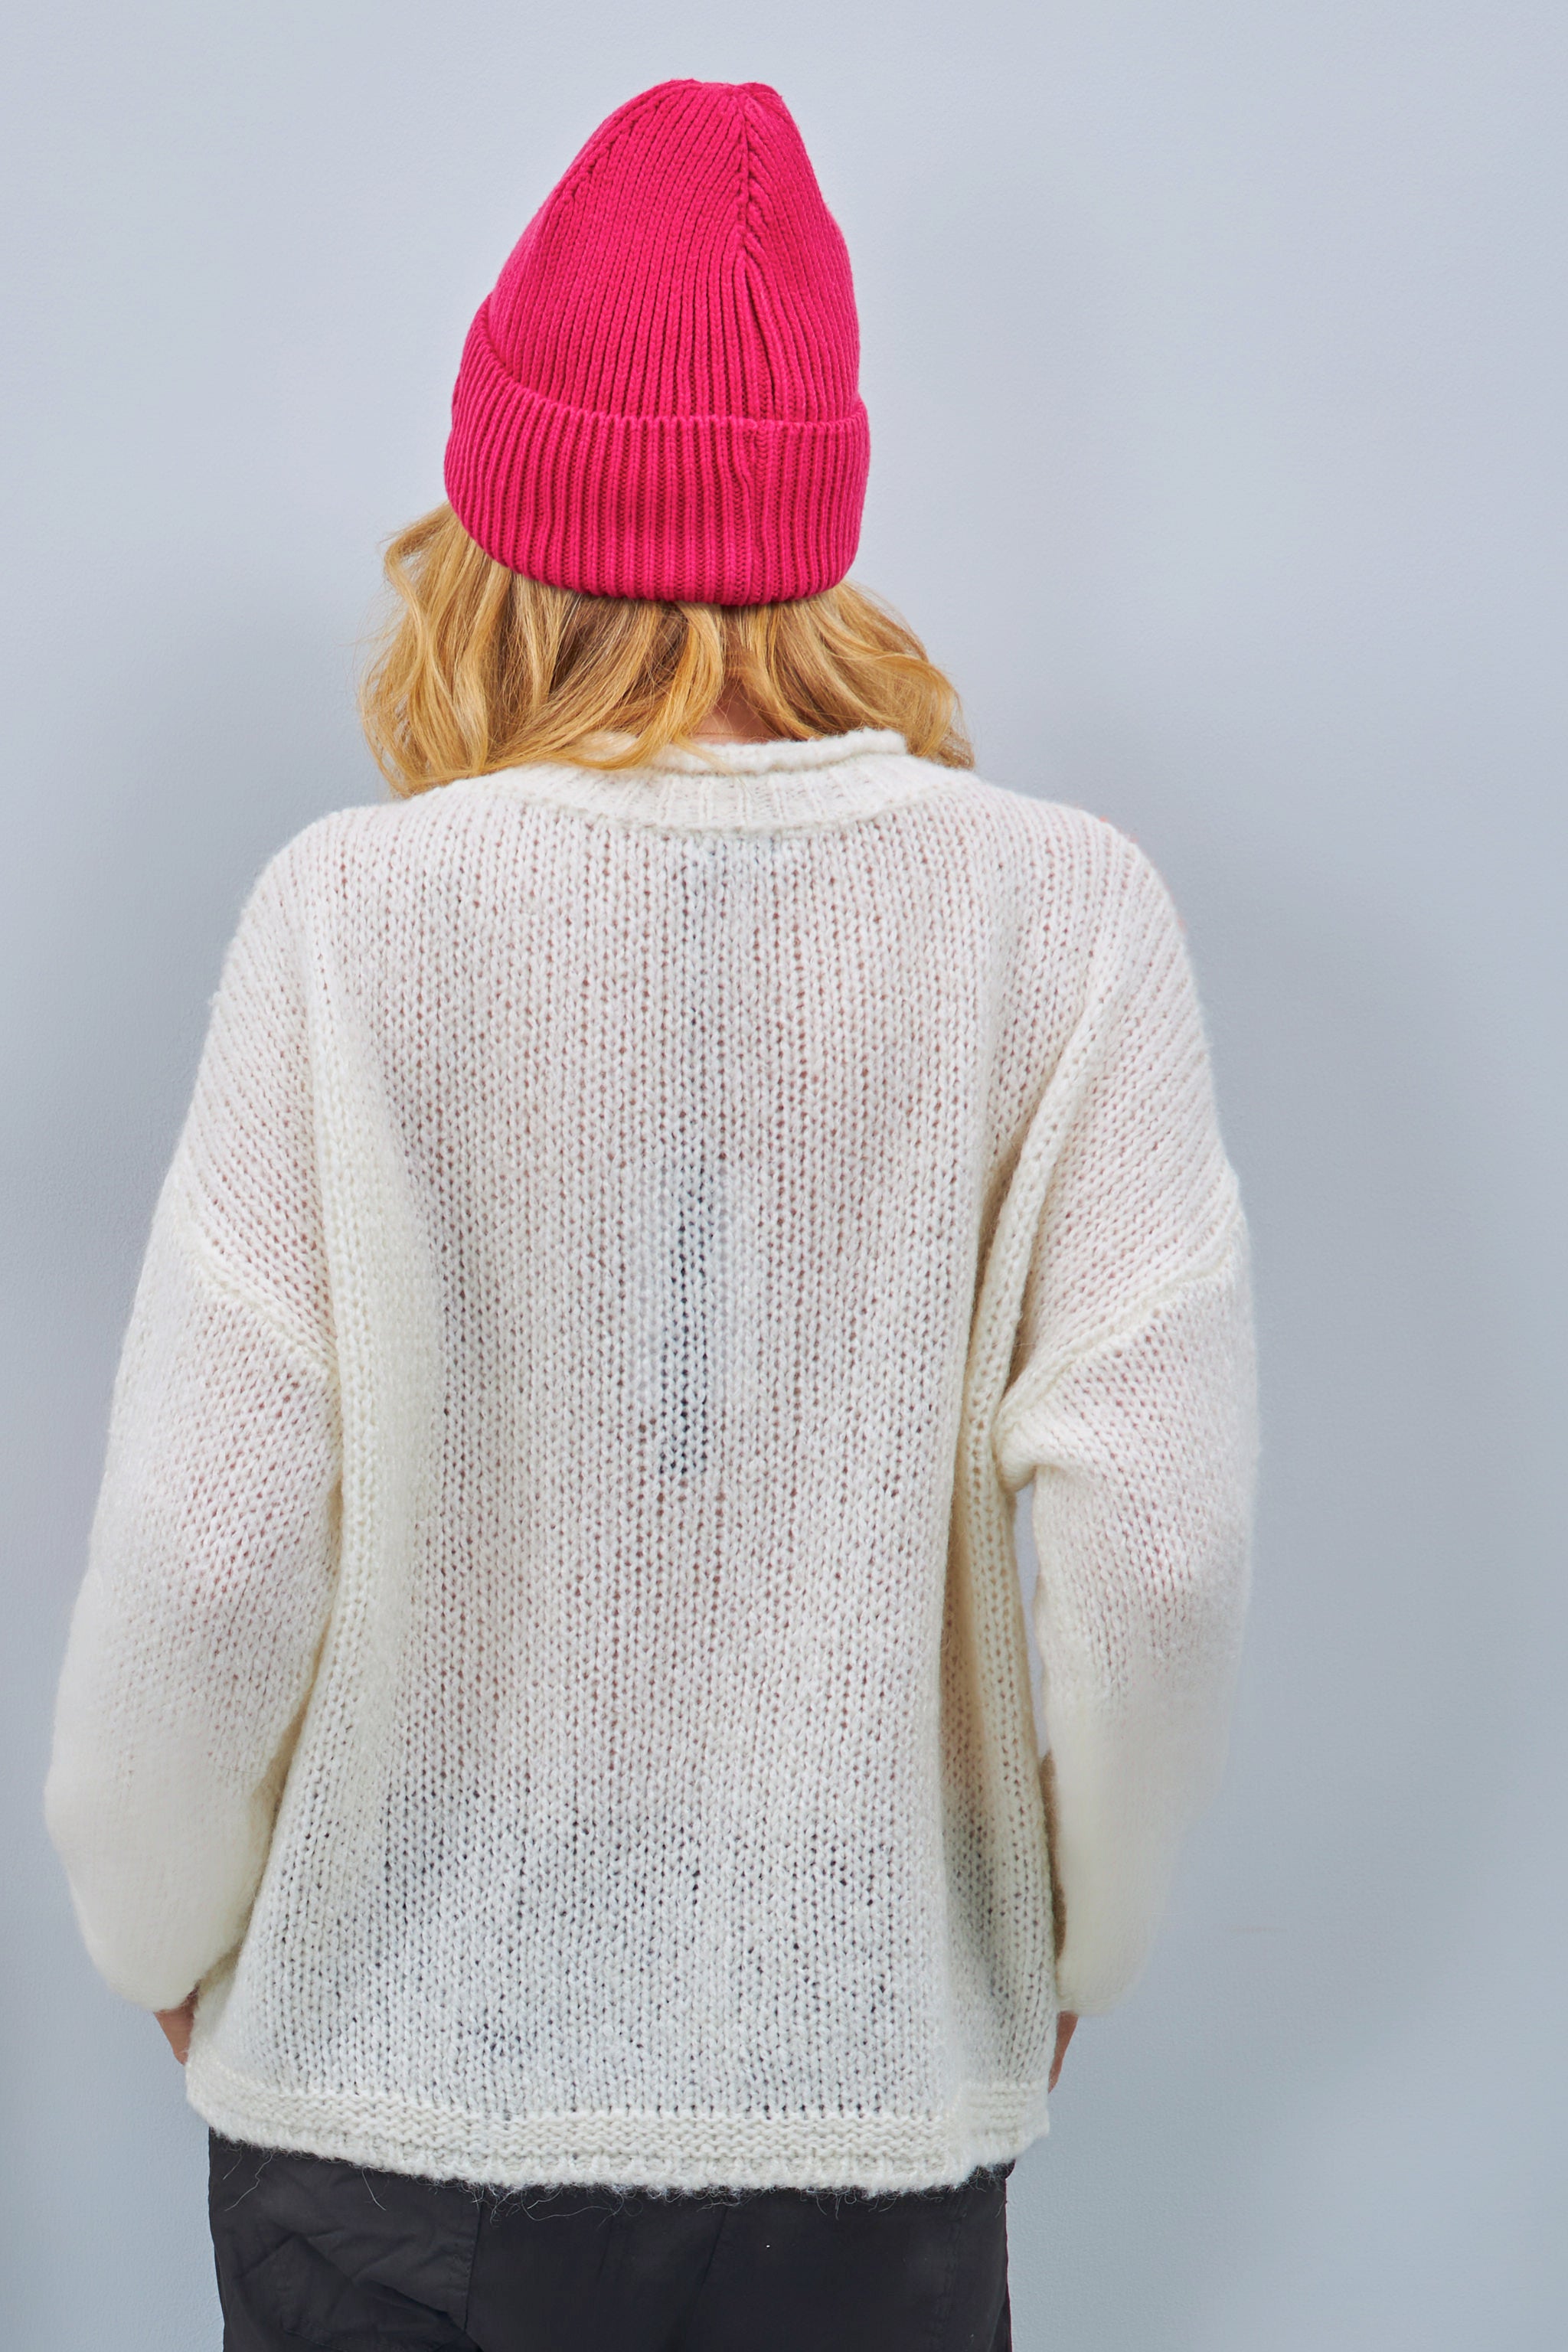 Knitted sweater with "wink smiley", ecru-colored